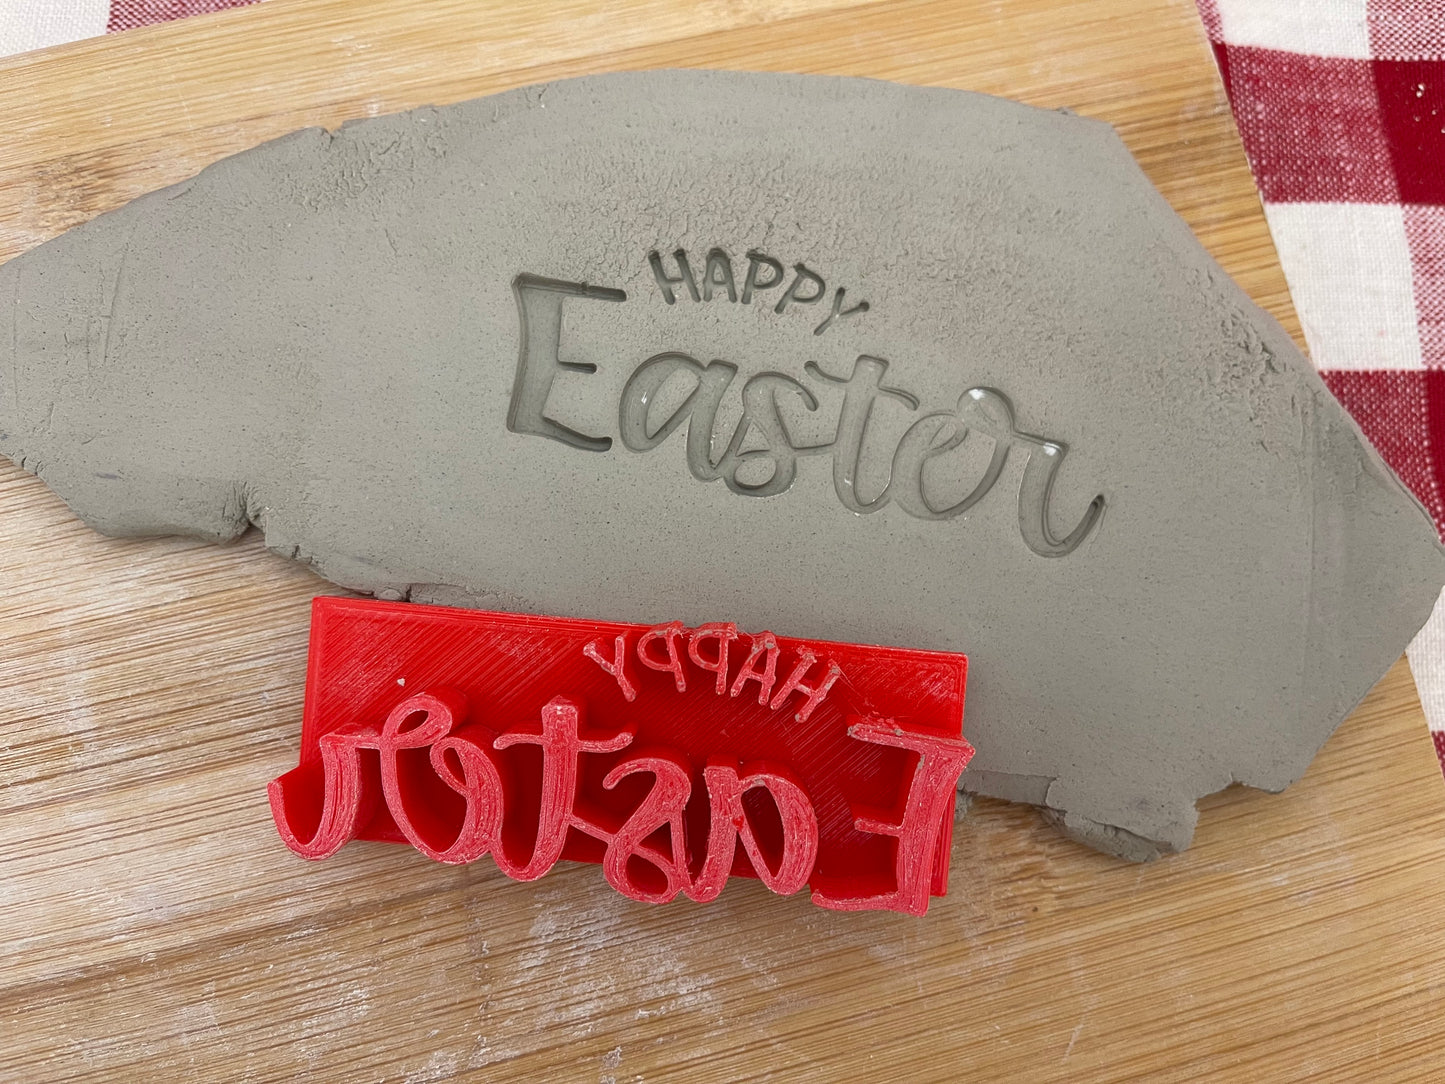 "Happy Easter" word stamp - plastic 3D Printed, Multiple Sizes Available.